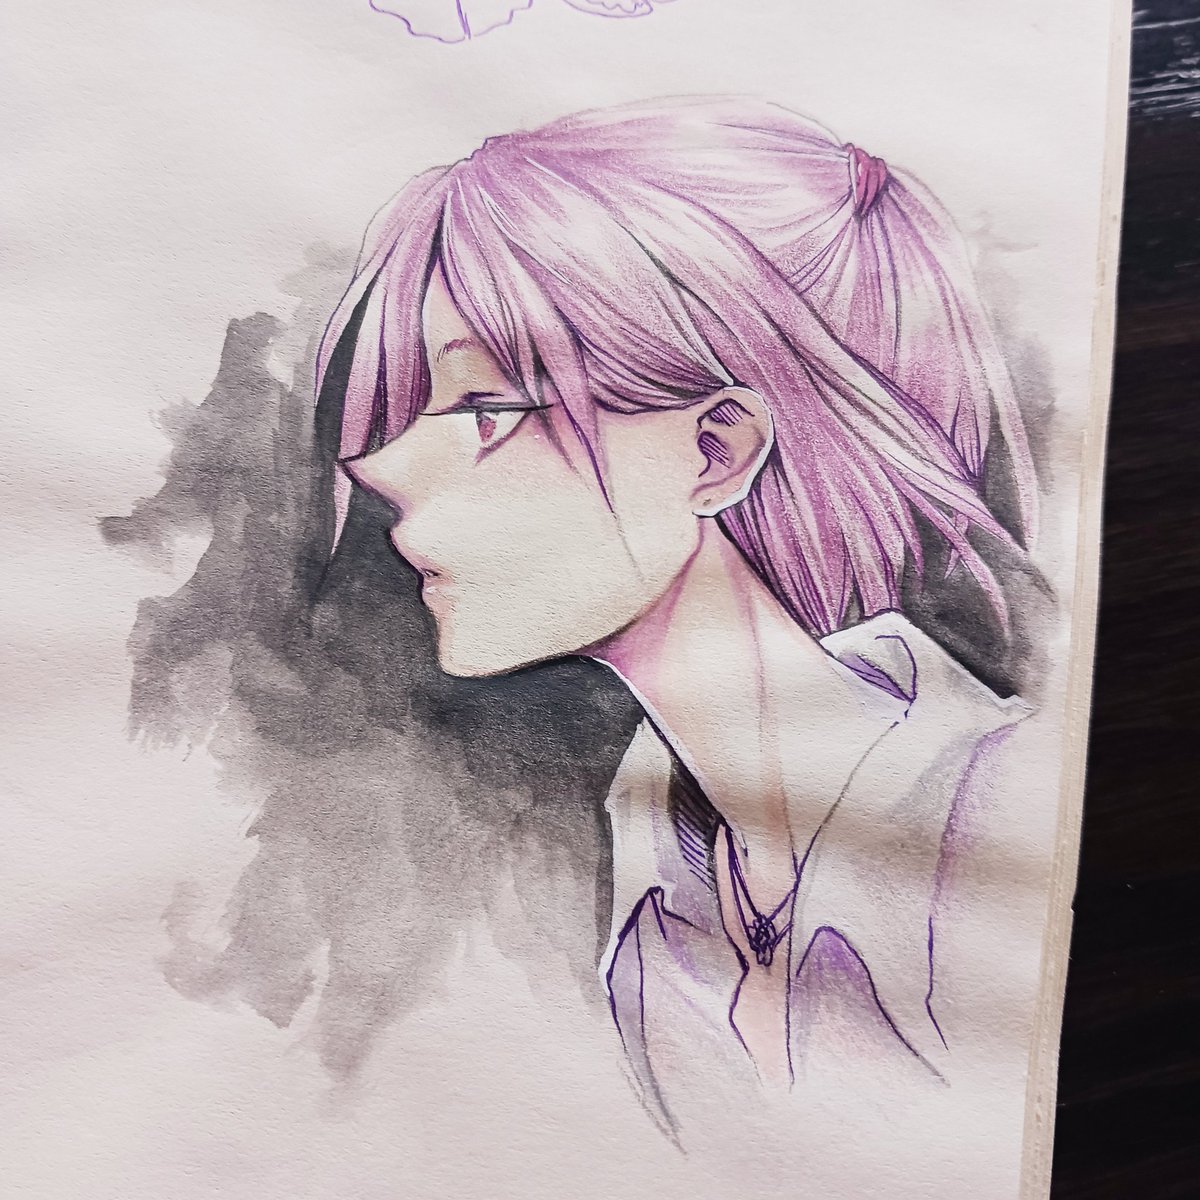 「Old color pencil sketch  」|Zambicandy (not really here)のイラスト